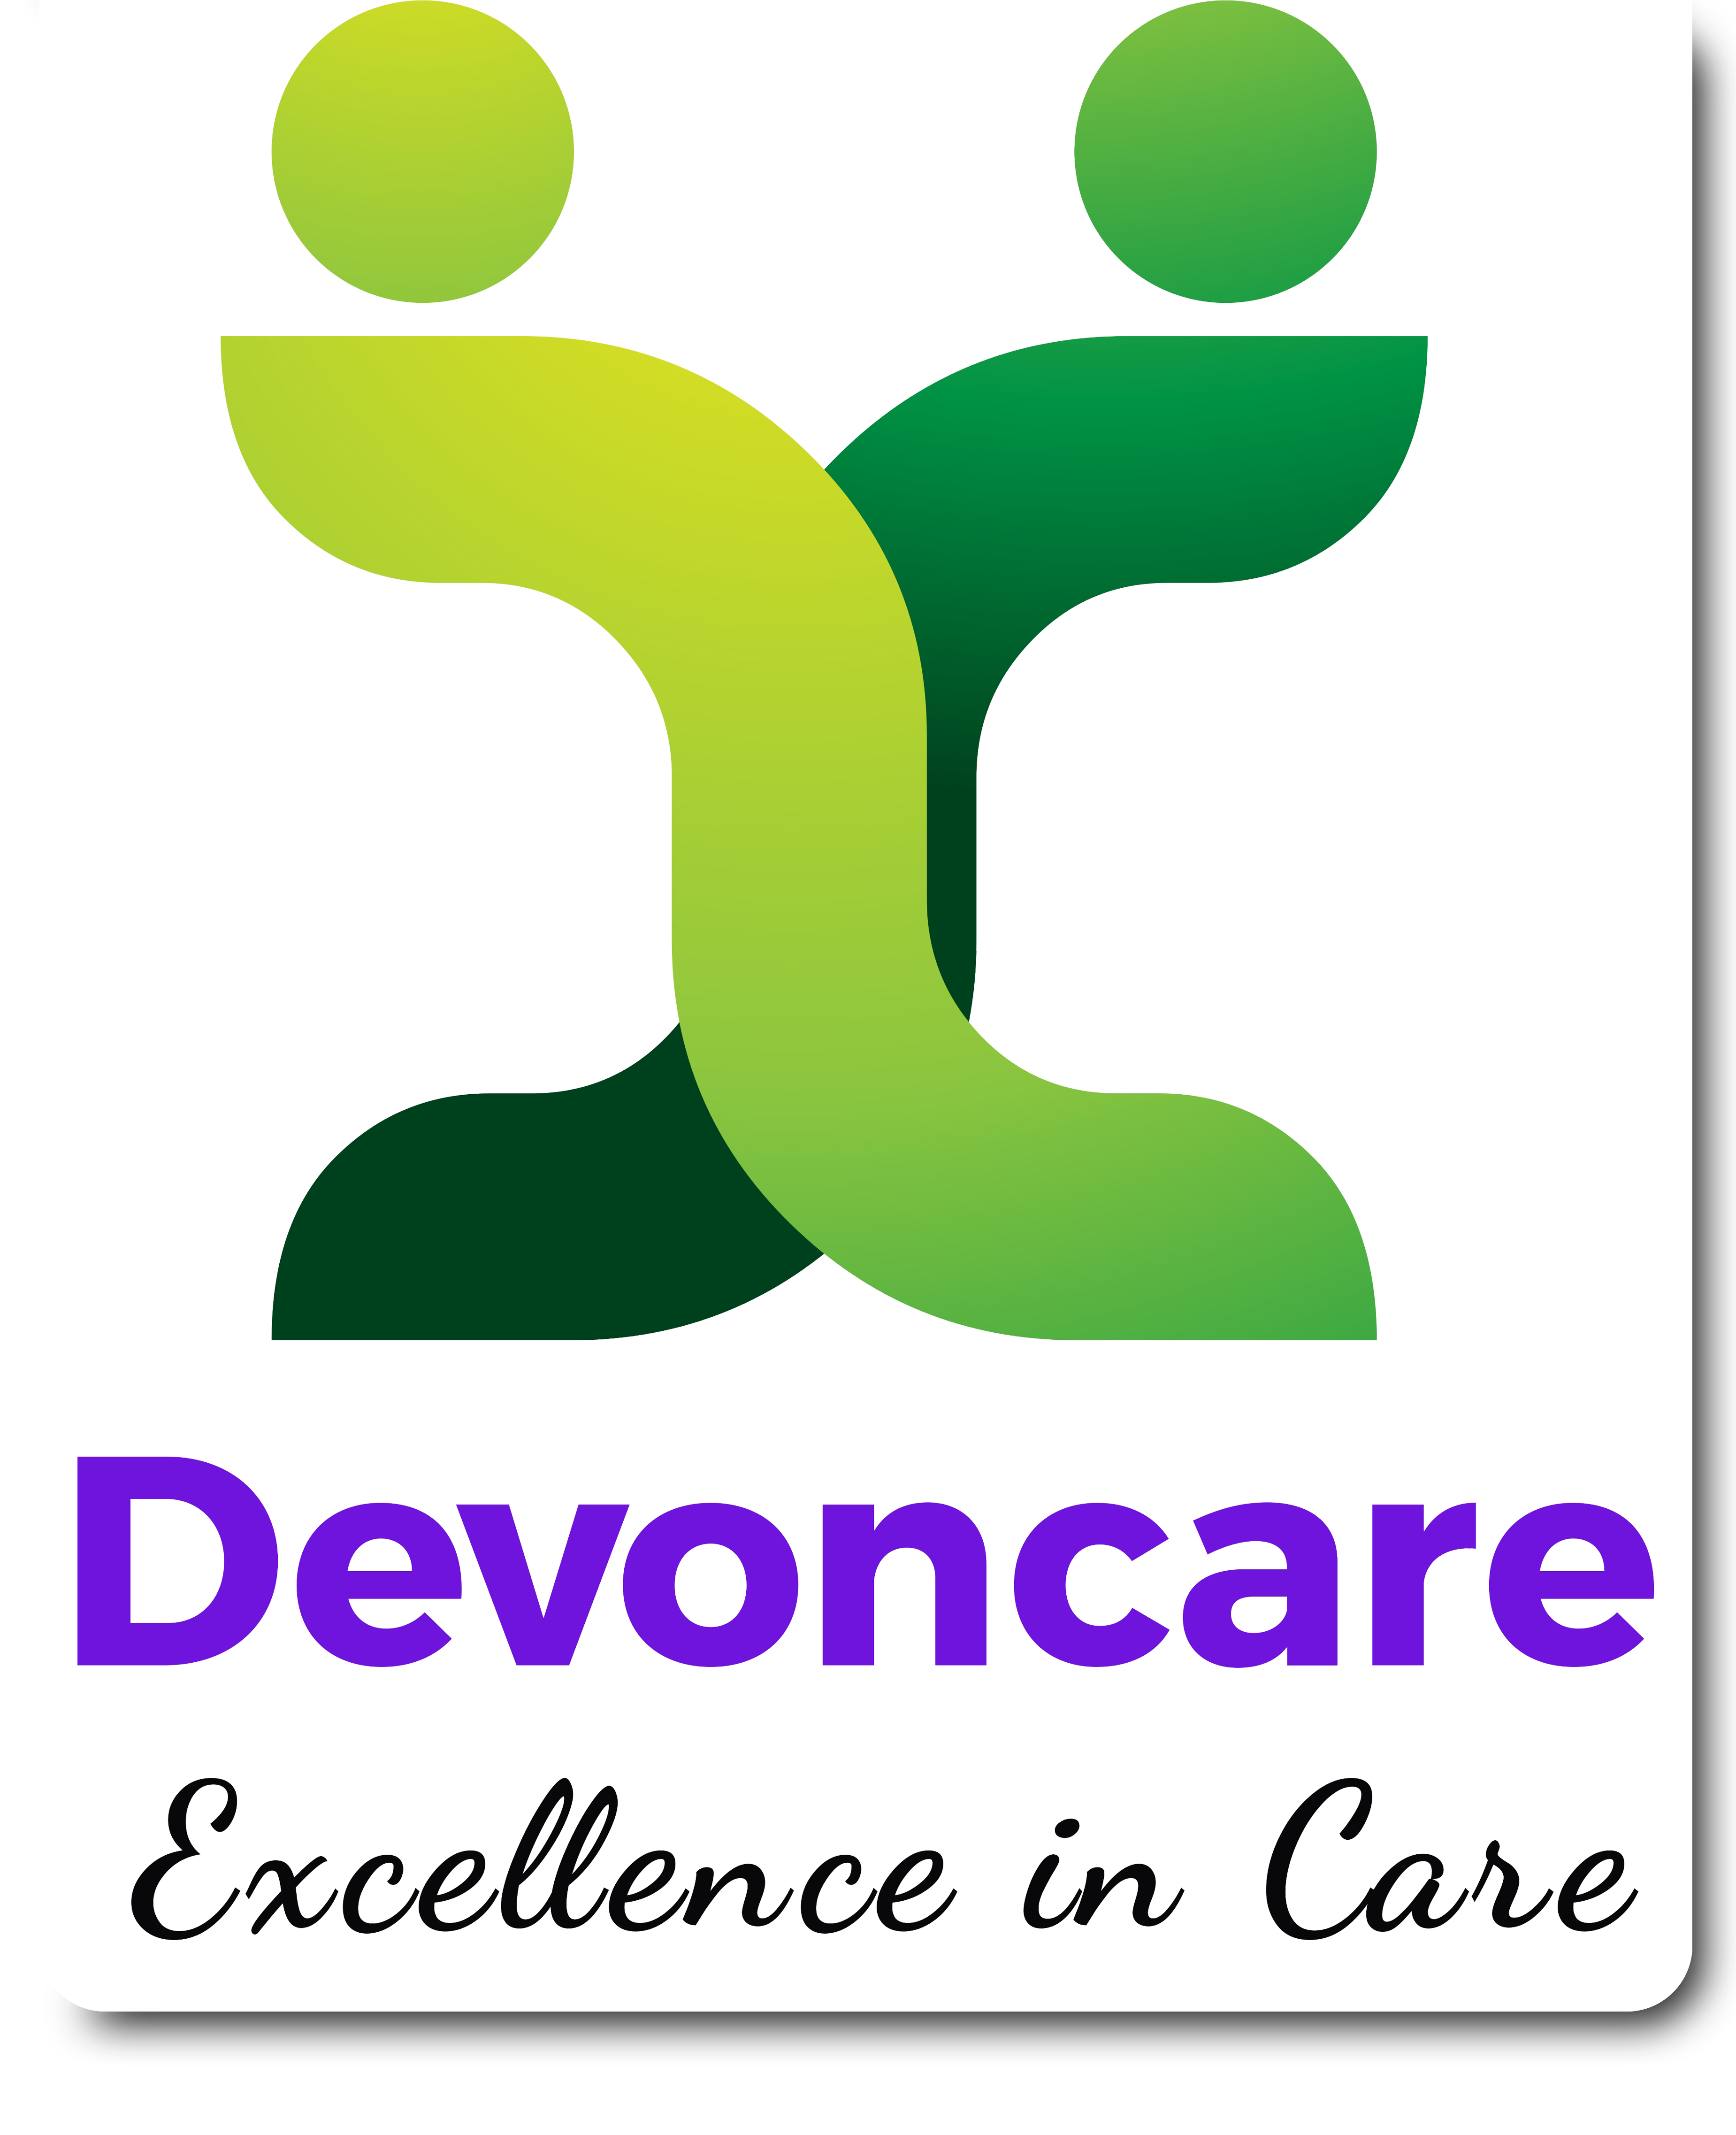 Contact us about... Devoncare